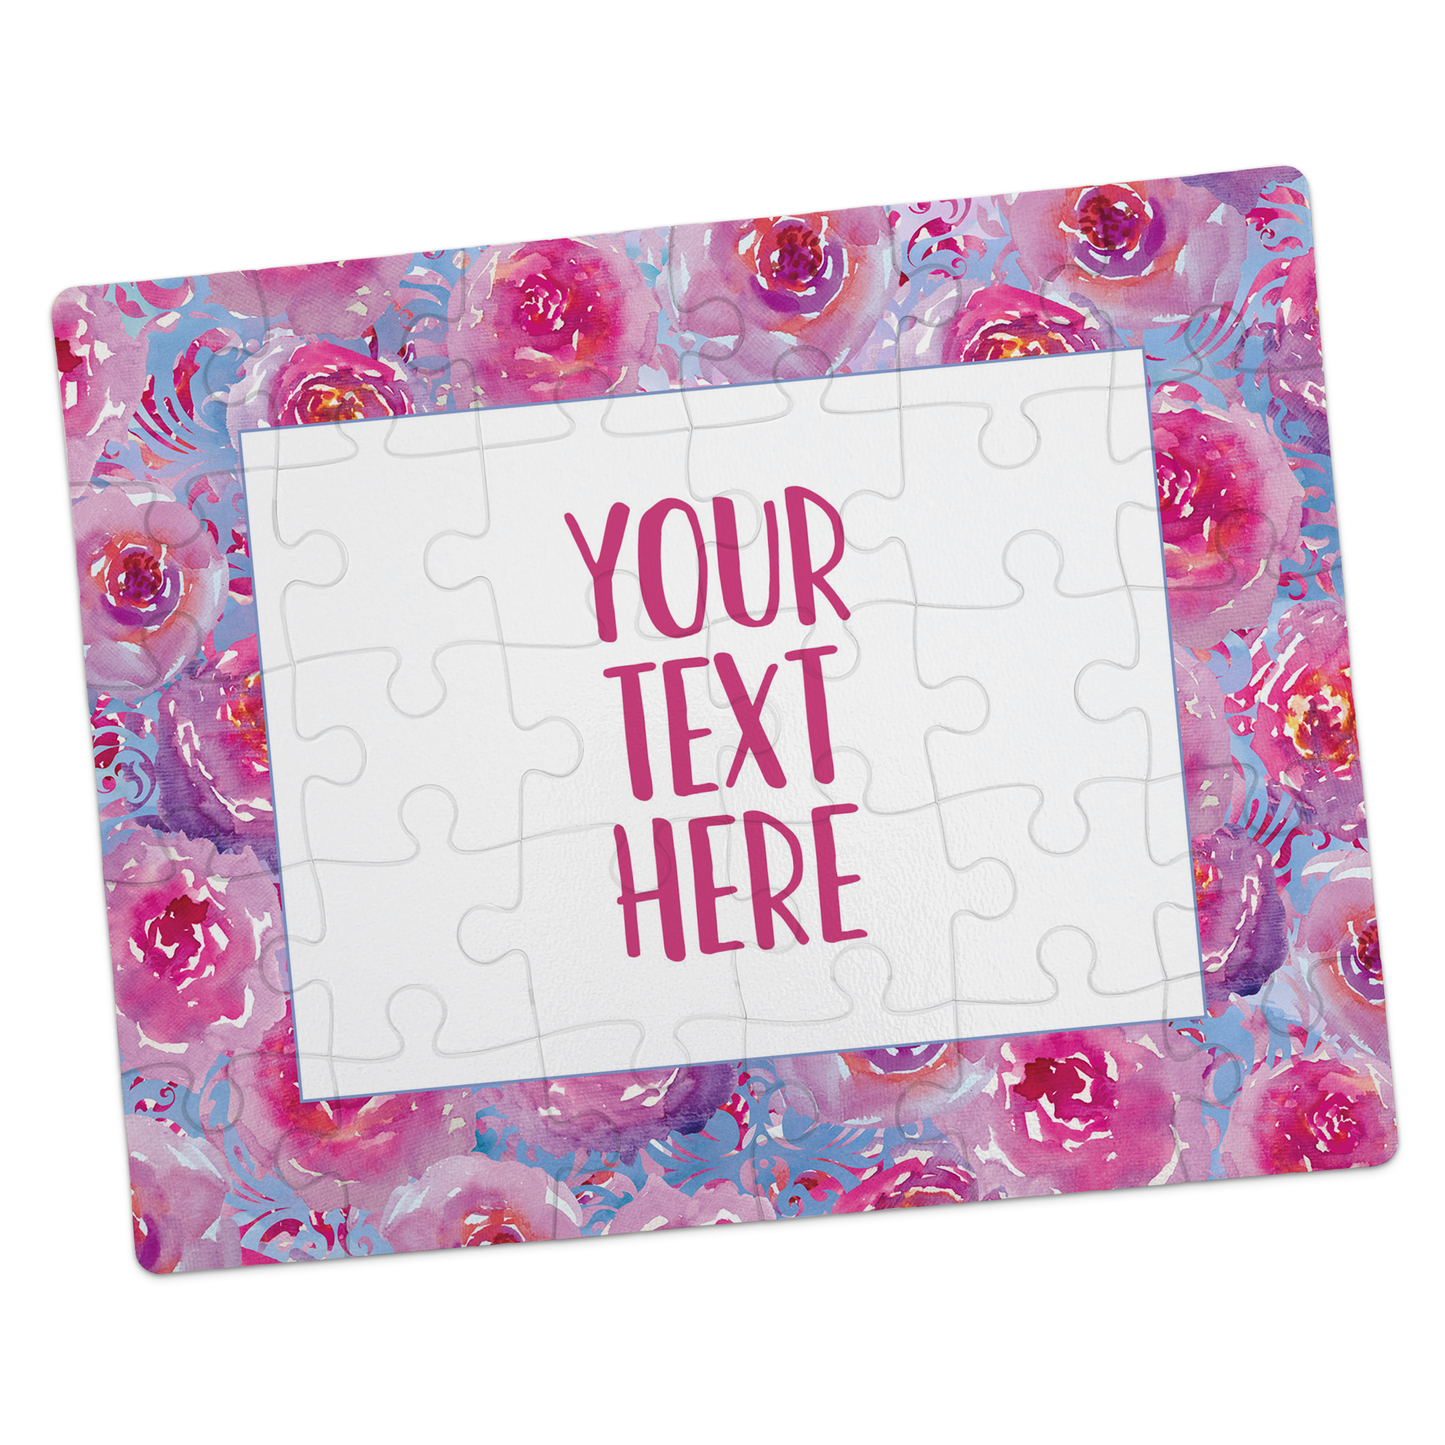 Create Your Own Puzzle - Floral Design - CYOP0047